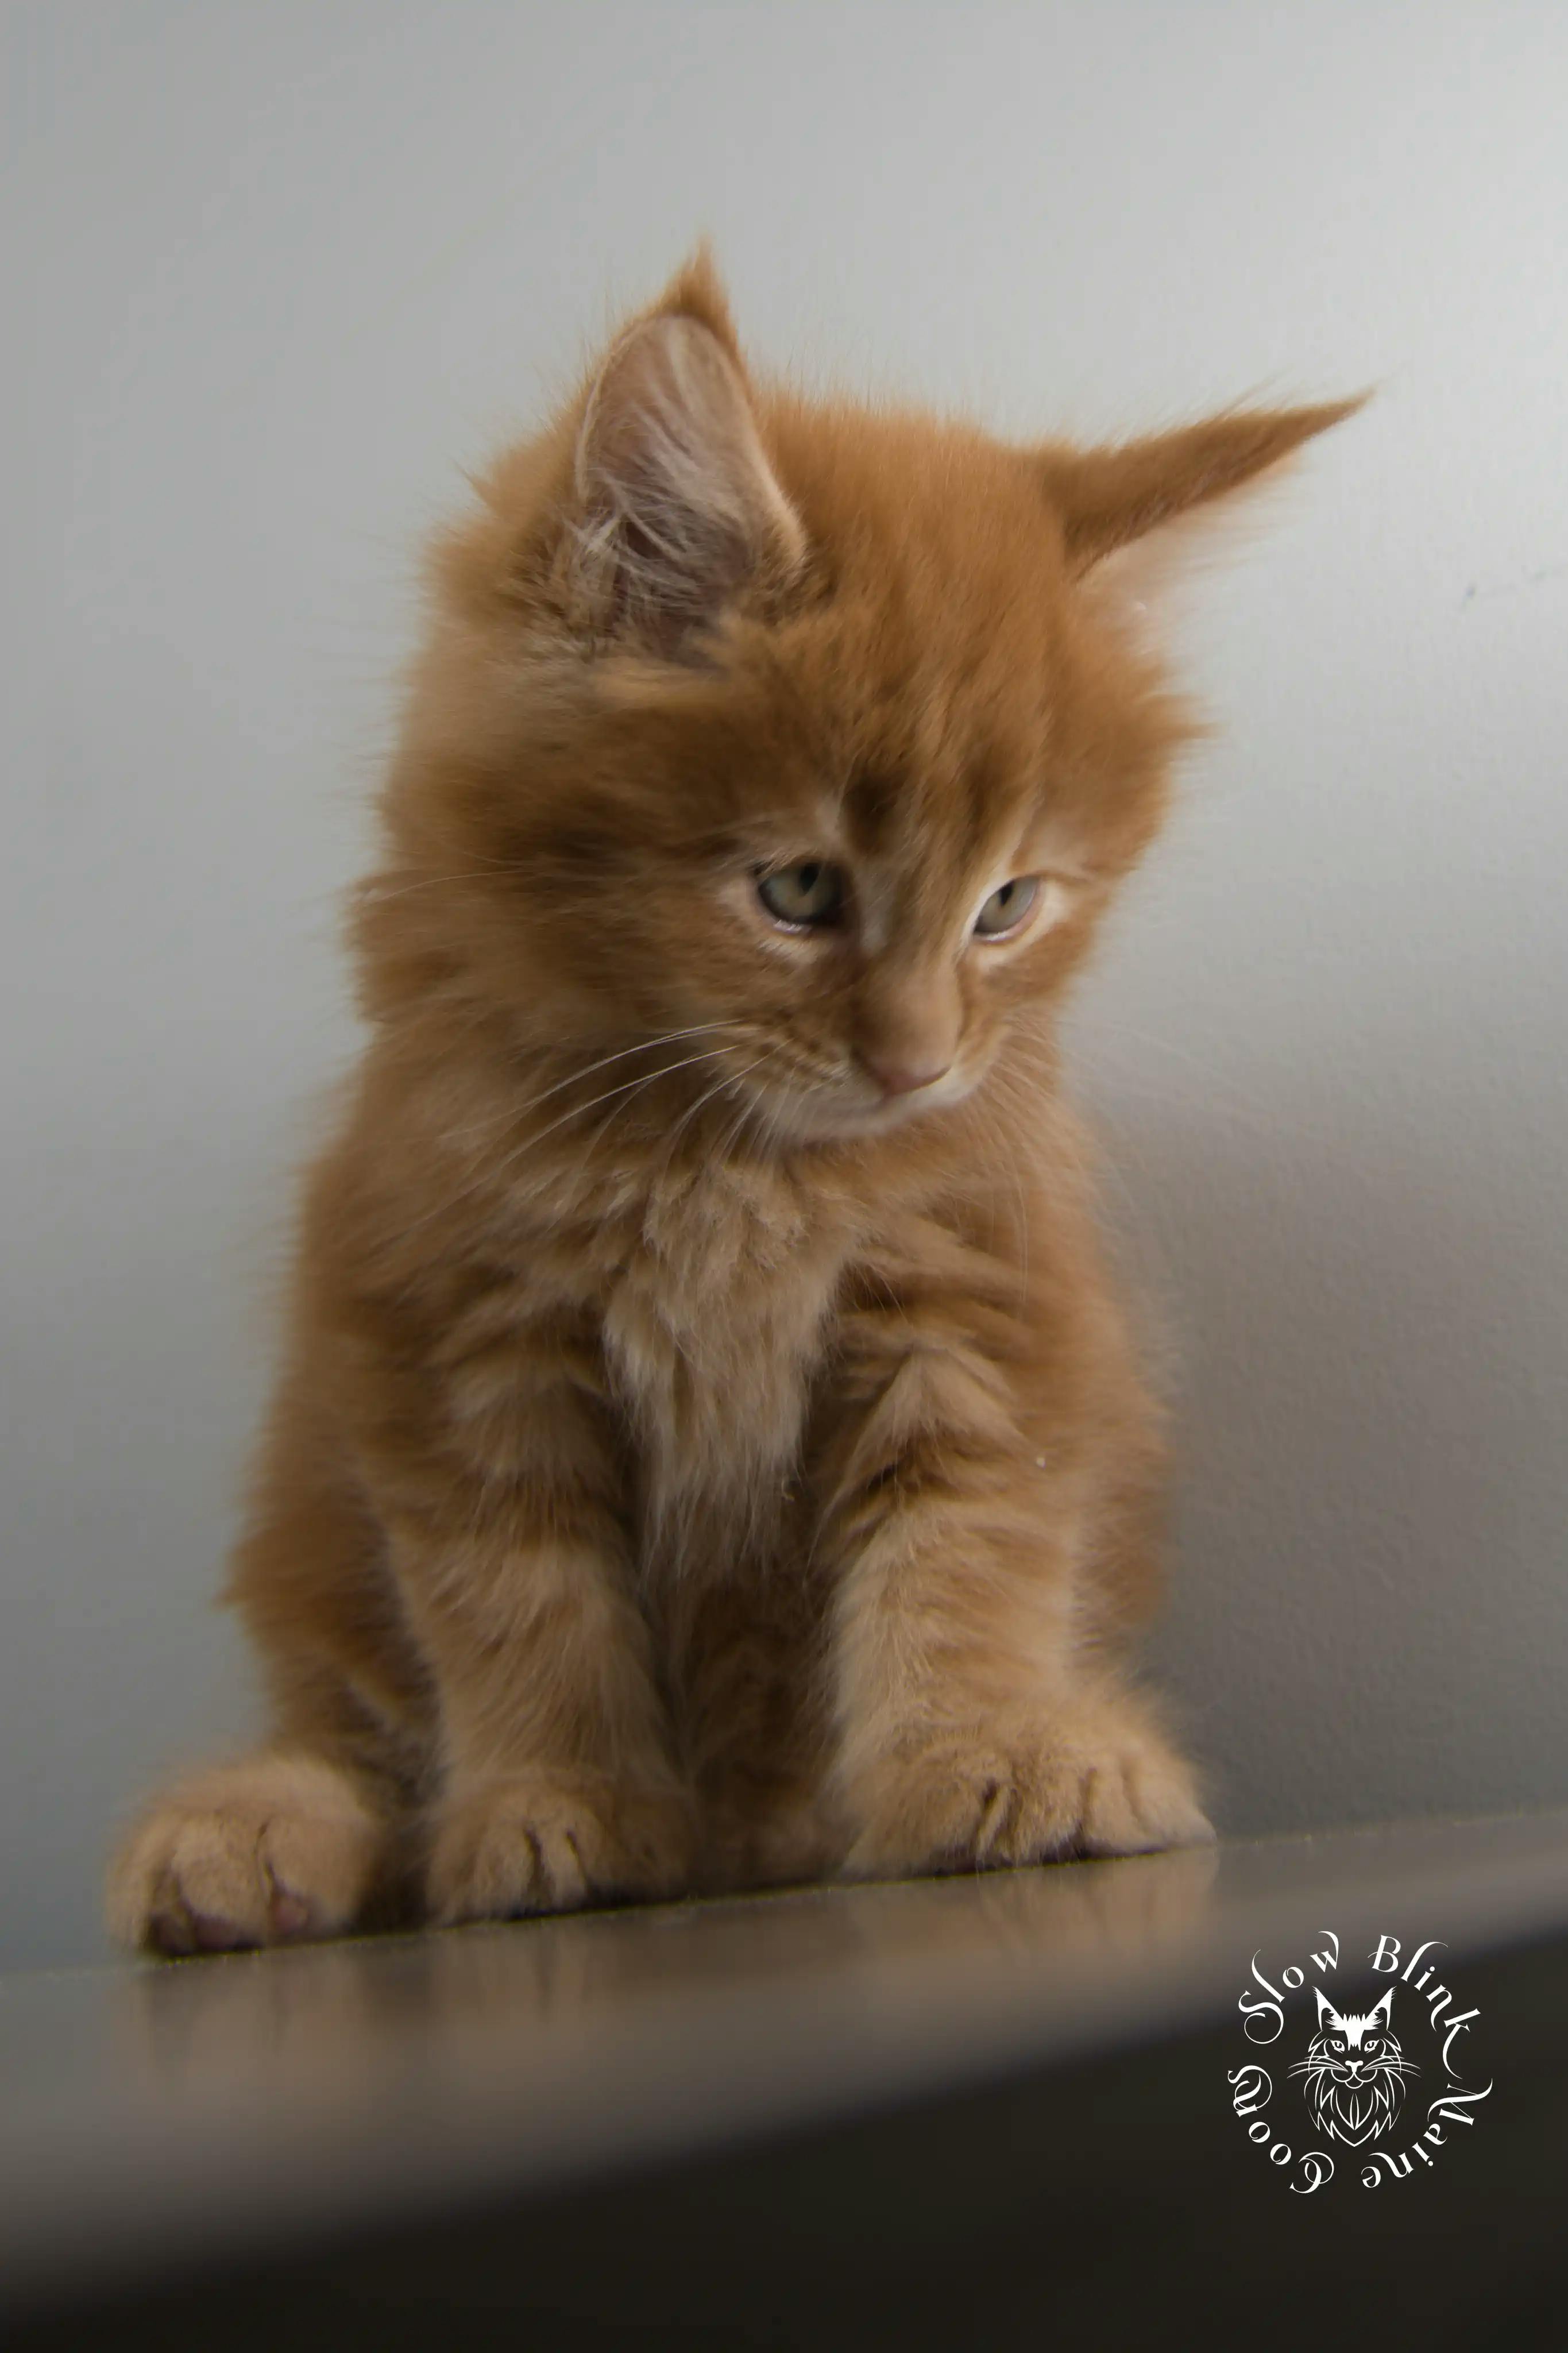 Orange (Red) Maine Coon Kittens > red orange maine coon kitten | slowblinkmainecoons | ems code d ds ds 22 1 12